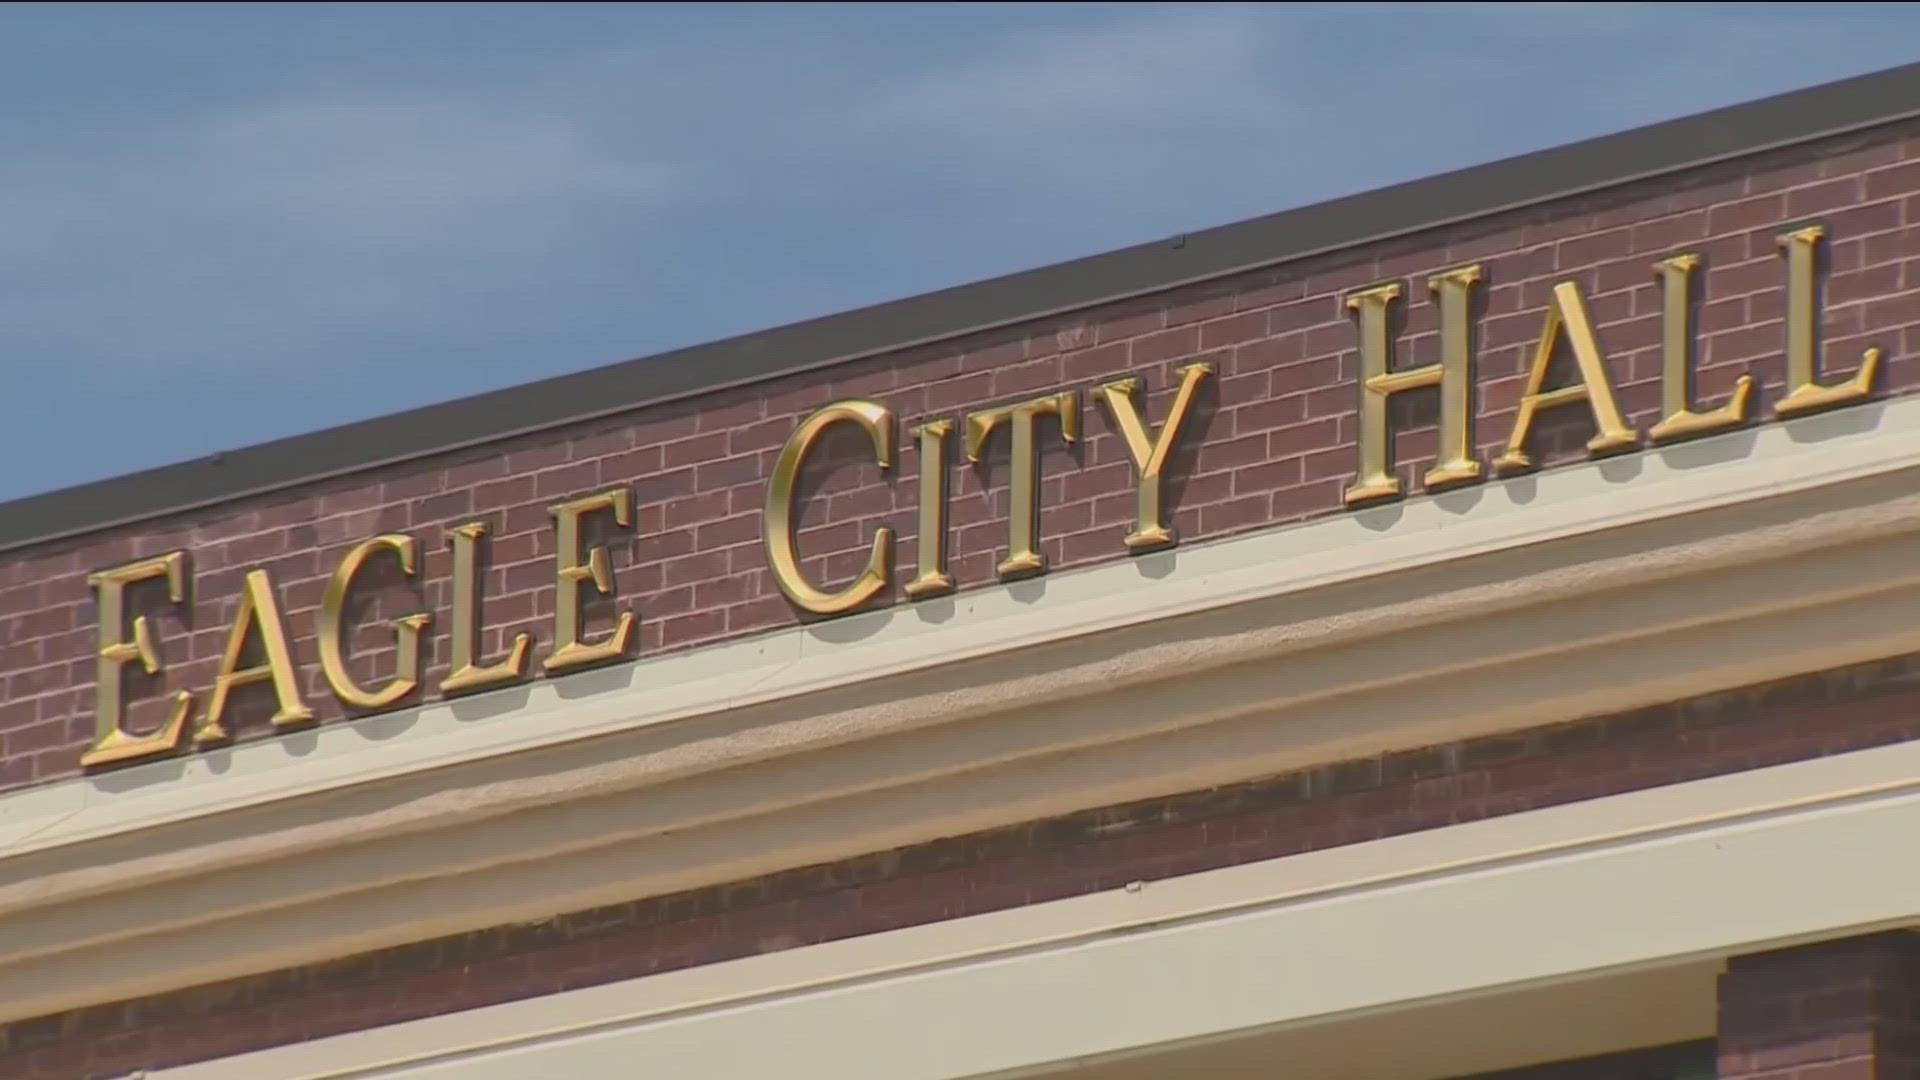 After public testimony wrapped up at about 10:45 p.m. Tuesday, the Eagle City Council voted to deliberate and possibly vote on Avimor's application on Thursday.